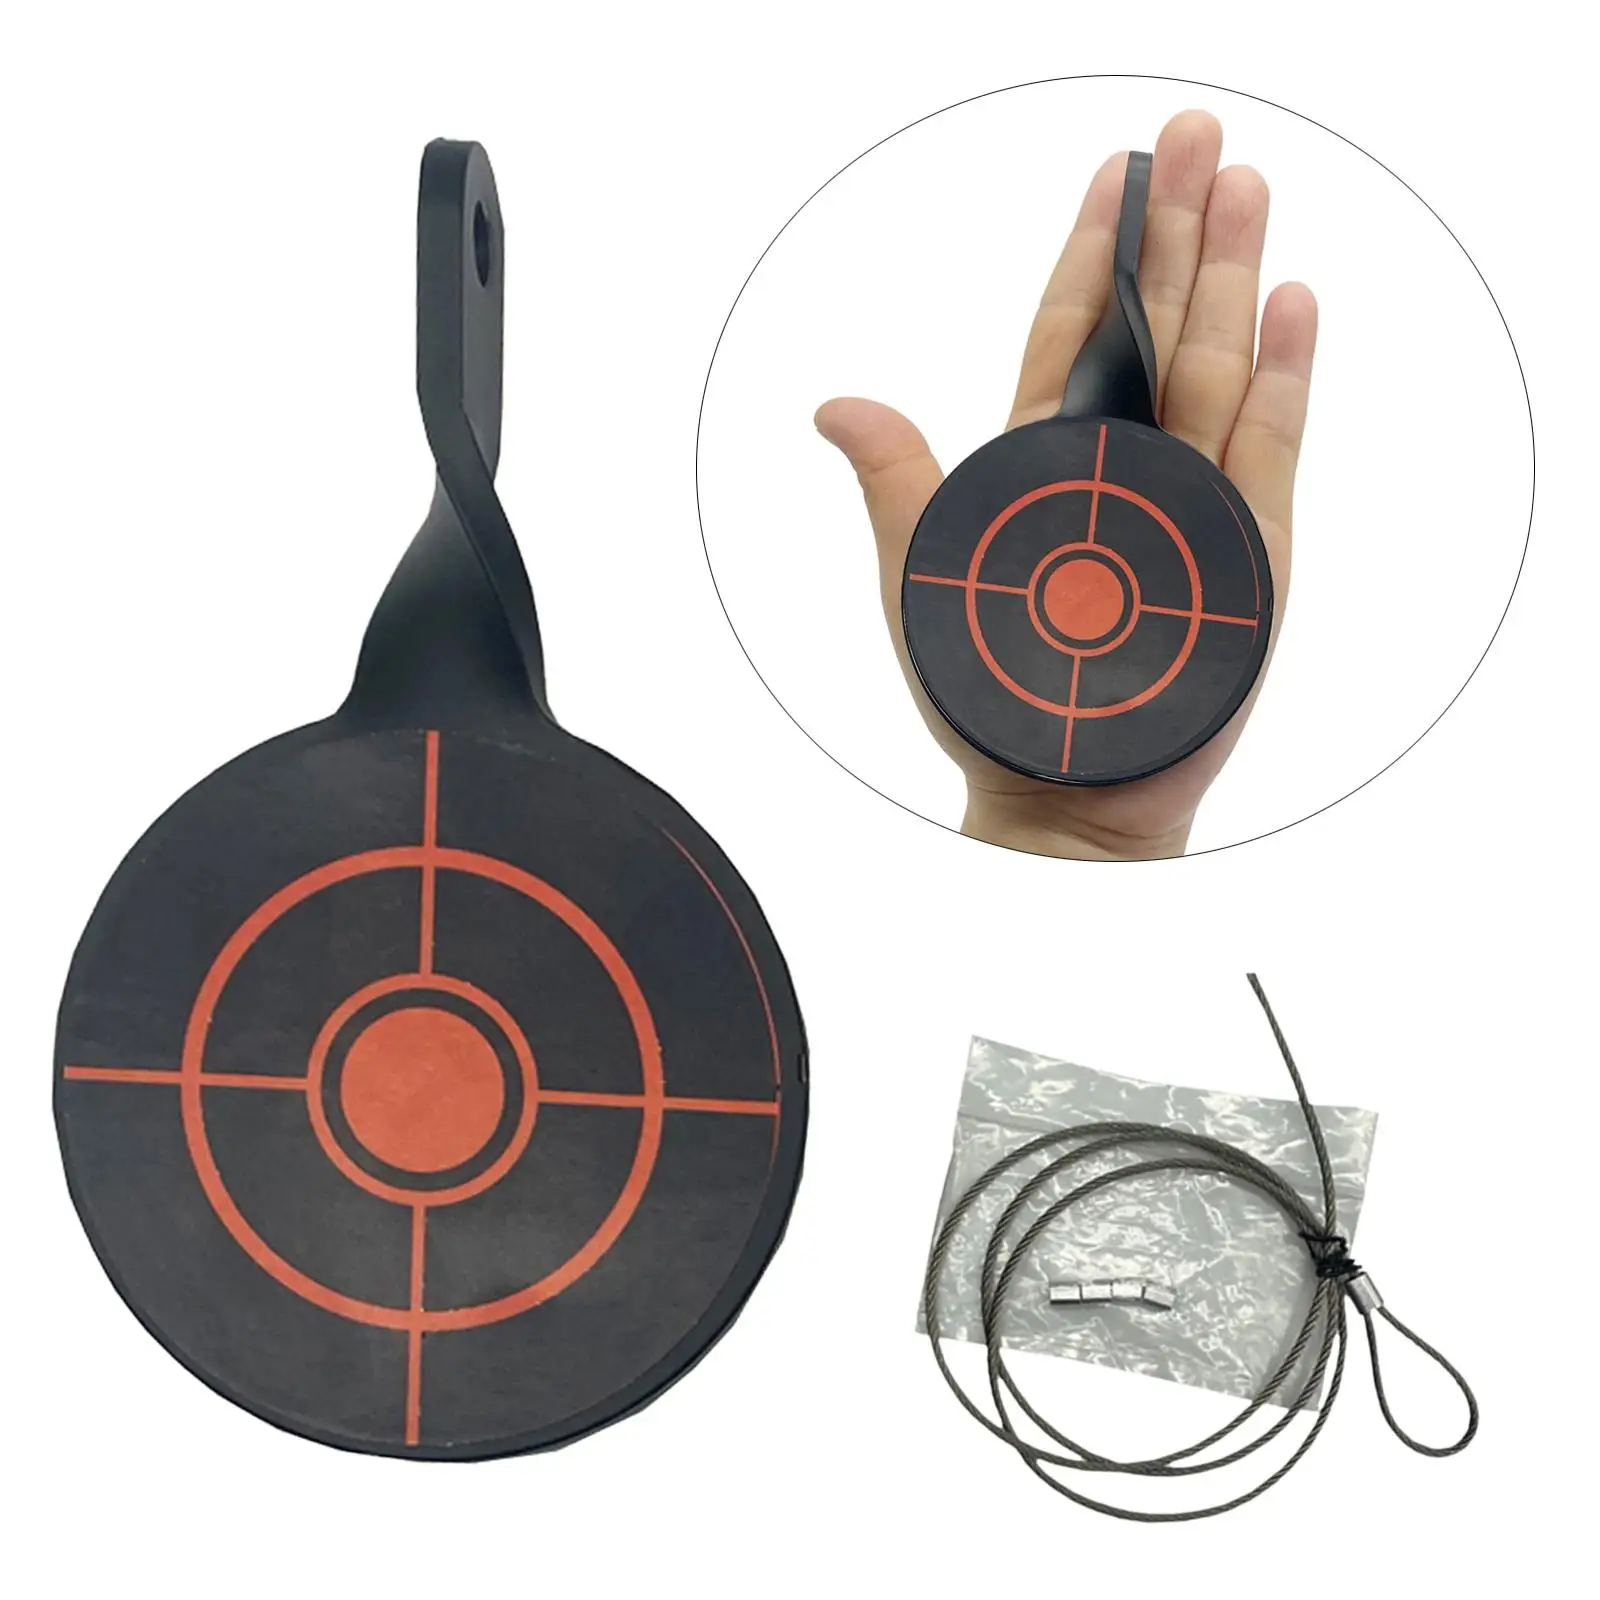 Resetting Targets with 10Pcs Stickers and Spots for Outdoor, Range, and Hunting Diameter 8cm